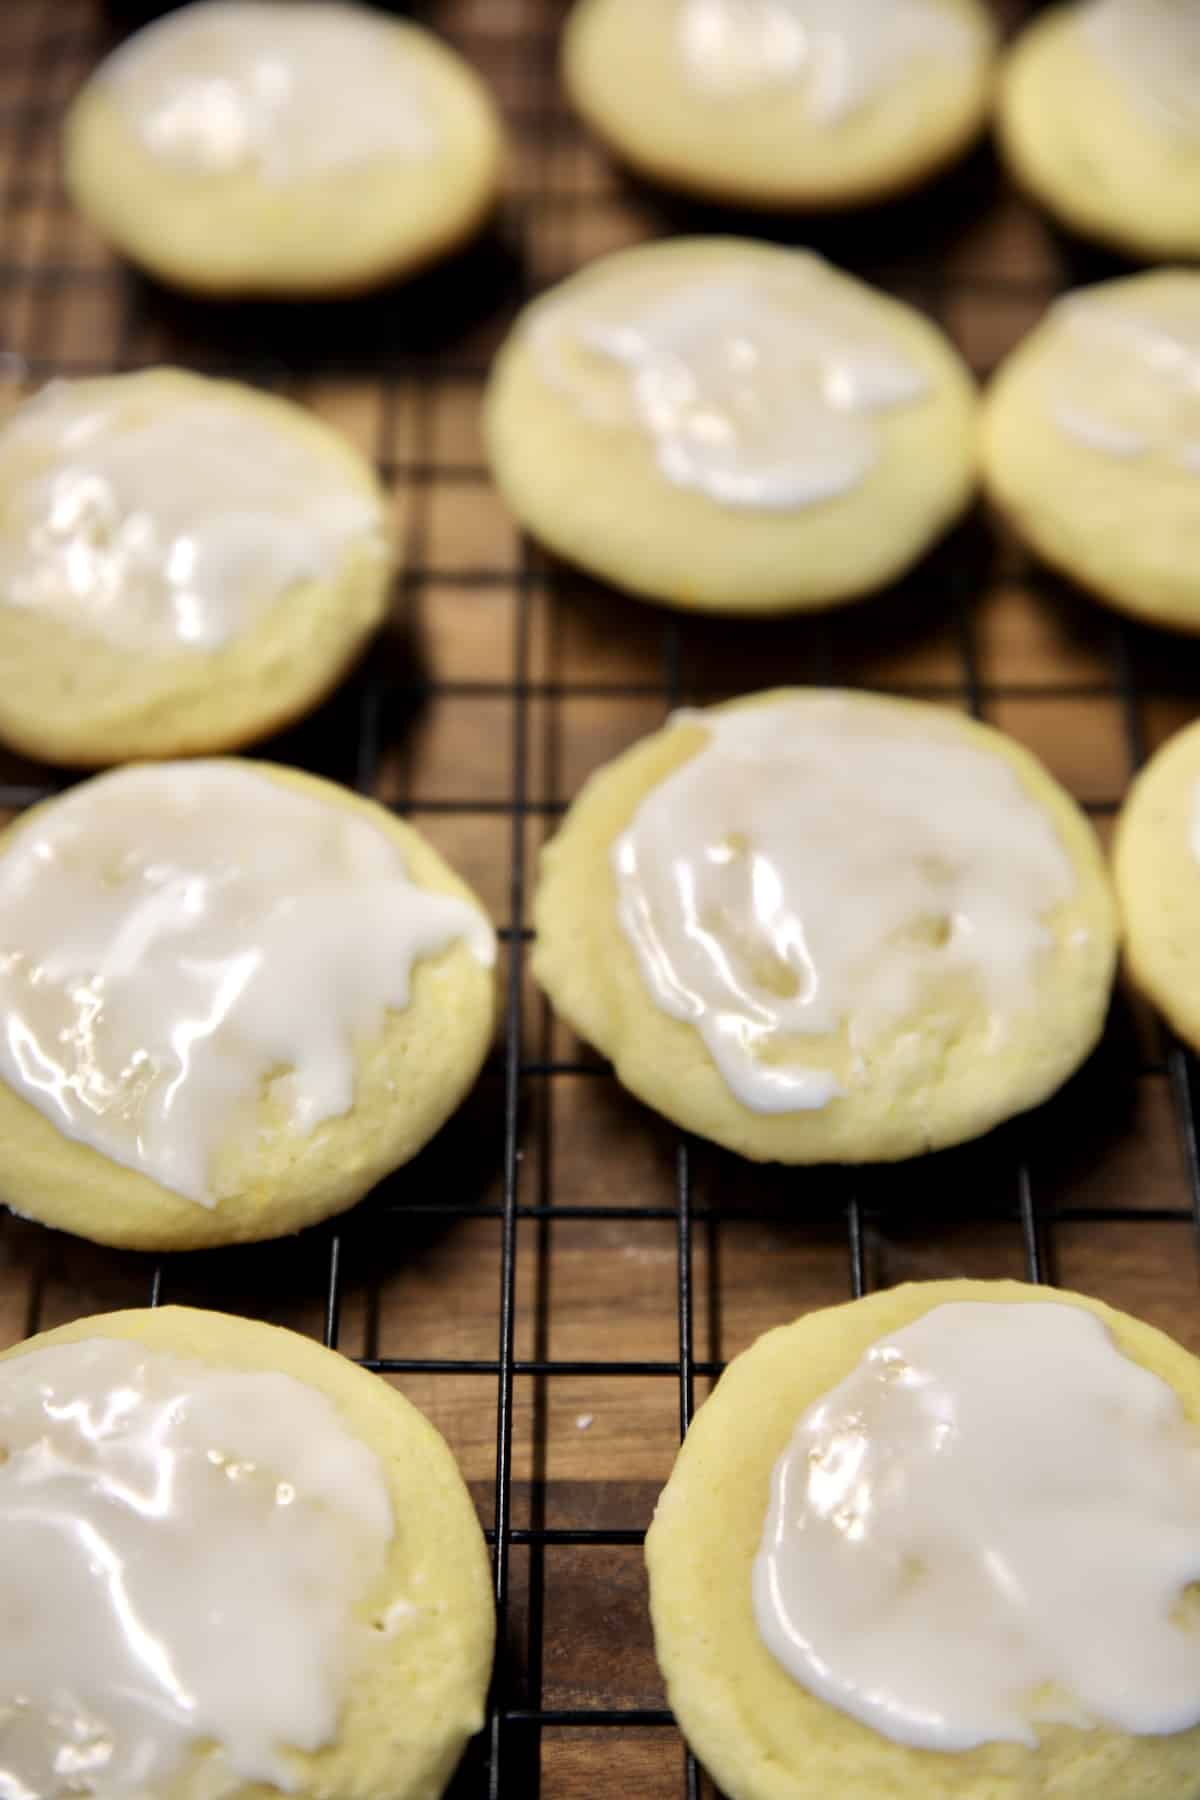 Cookies with icing on a wire rack.